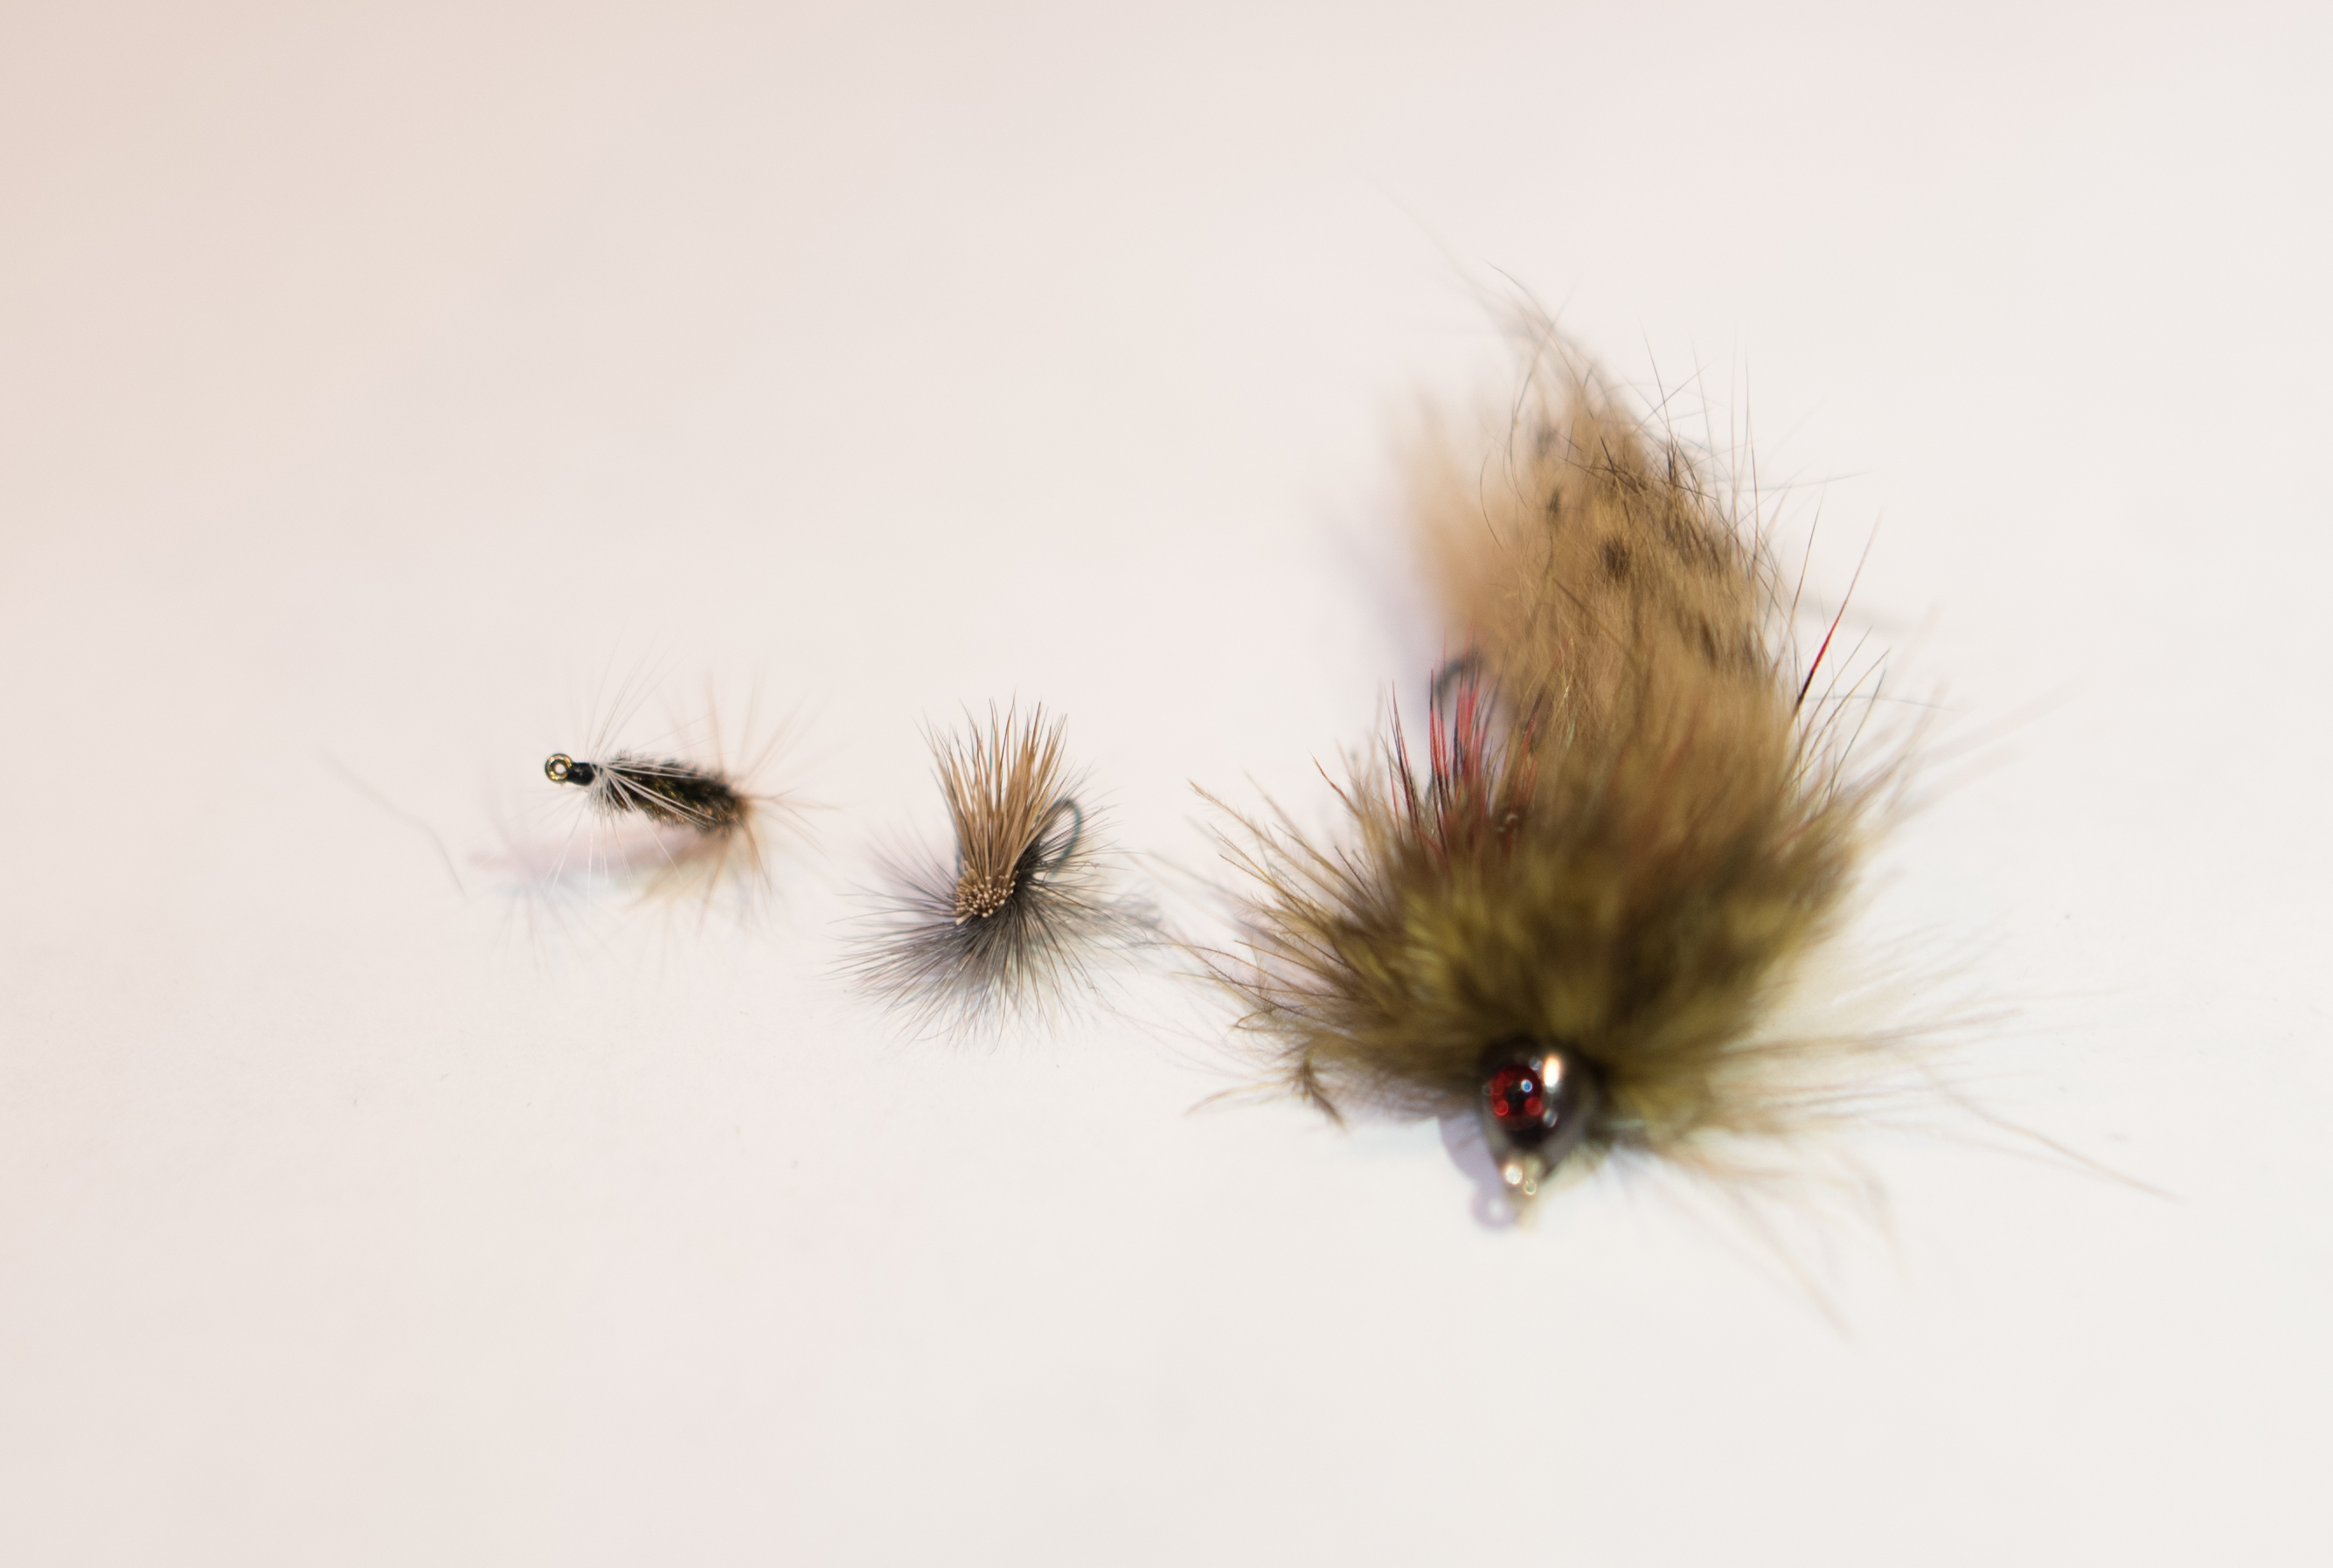 Beginners Fly Tying Guide: The Basic Tools and 5 Patterns to Tie